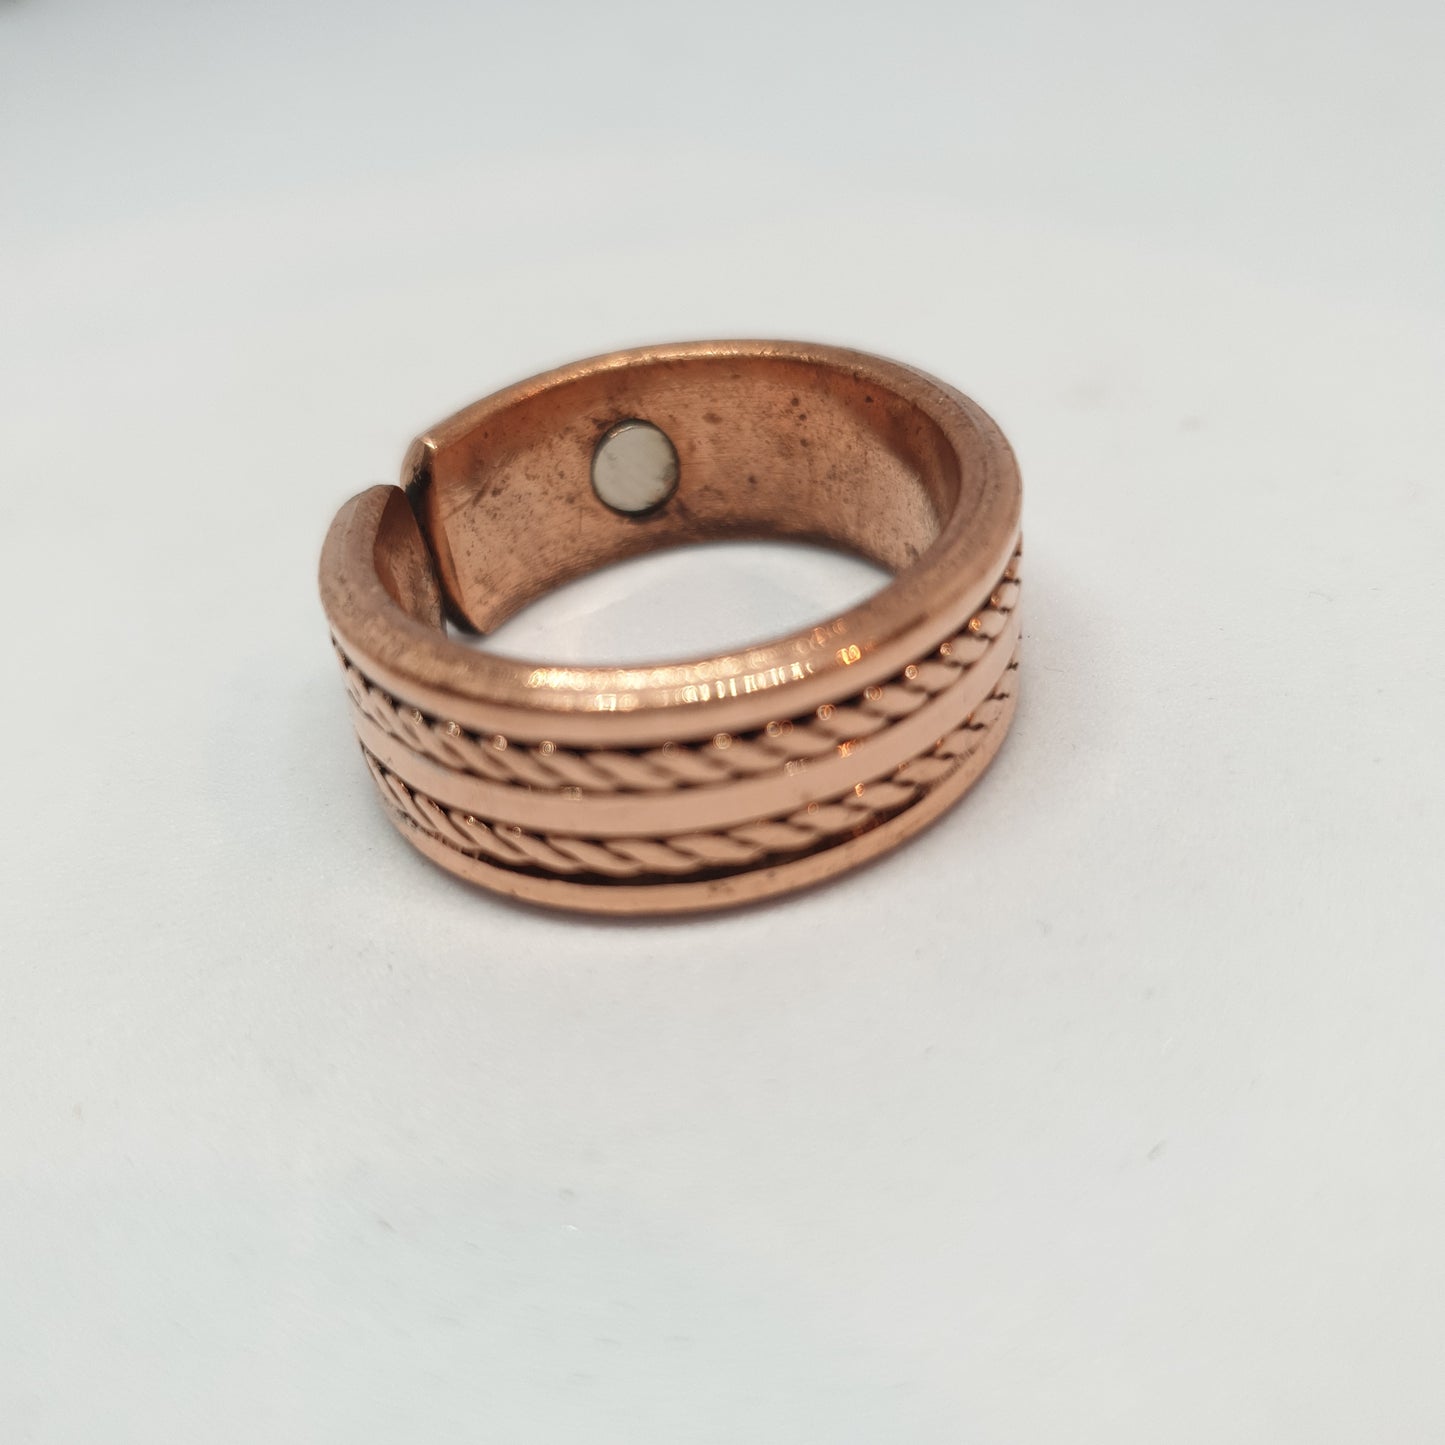 Doubl Twist Copper Magnetic Ring - Rivendell Shop